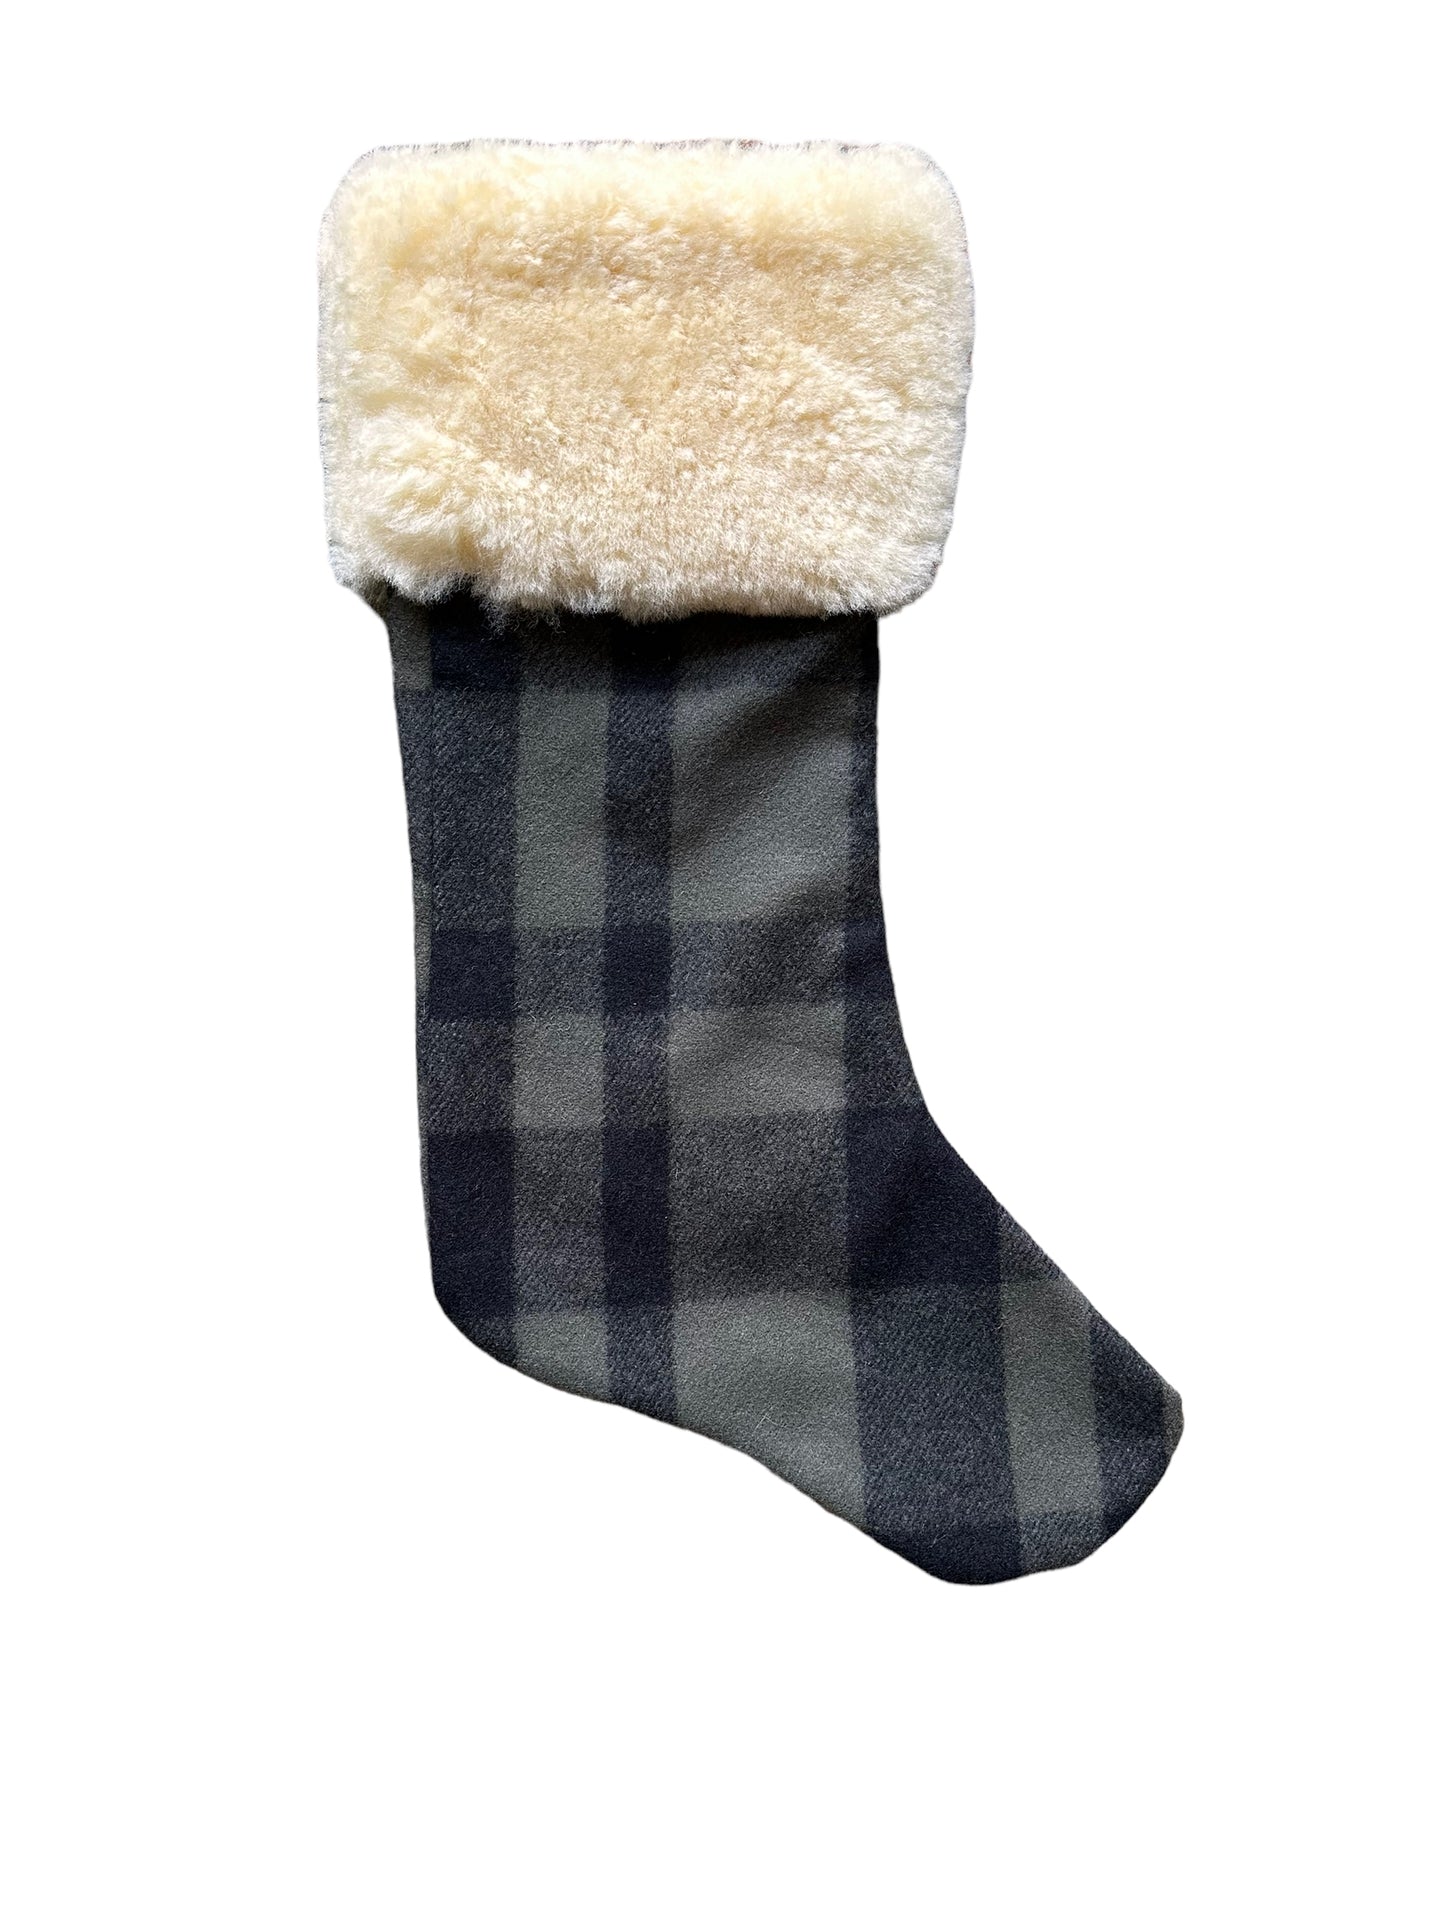 Front View of Filson Forest Green Plaid Mackinaw Wool Christmas Stocking |  Barn Owl Vintage Goods | Vintage Filson Workwear Seattle